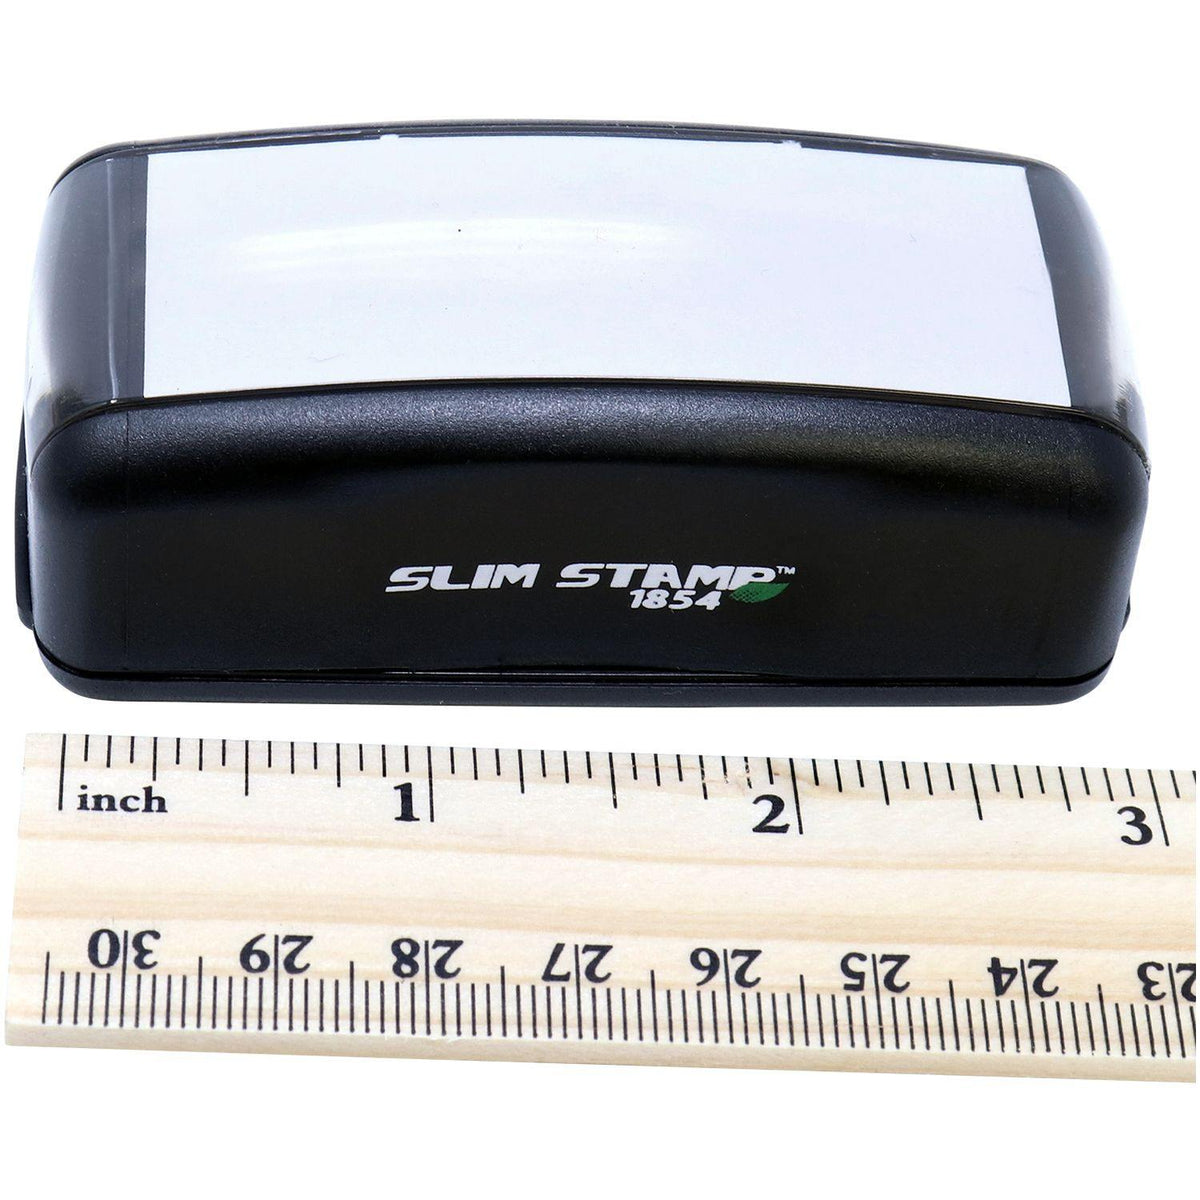 Measurement Large Pre Inked Application Incomplete Stamp with Ruler